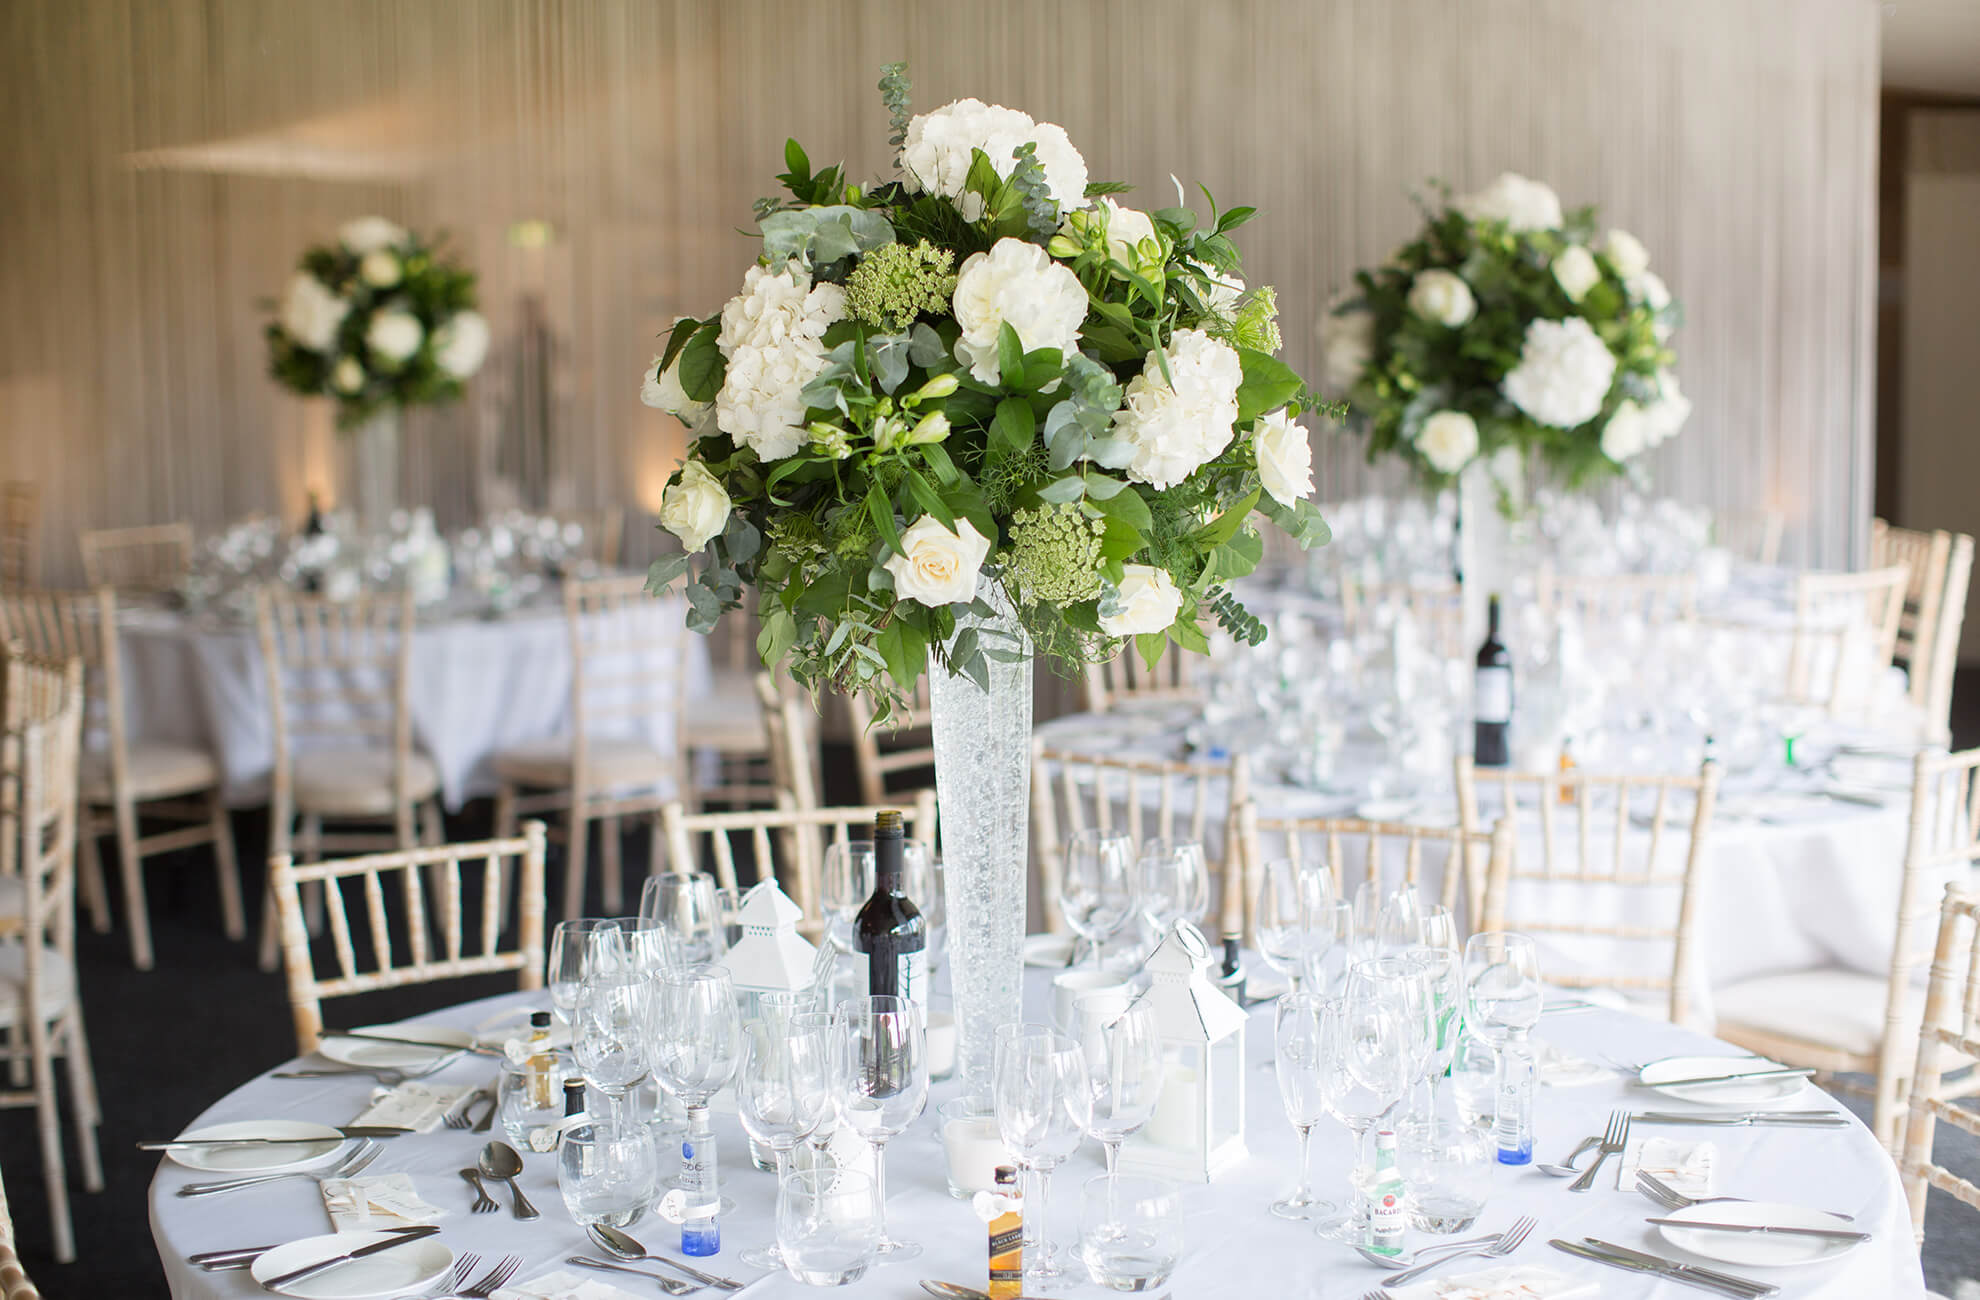 White and green floral table centerpieces adorned tables for the wedding reception